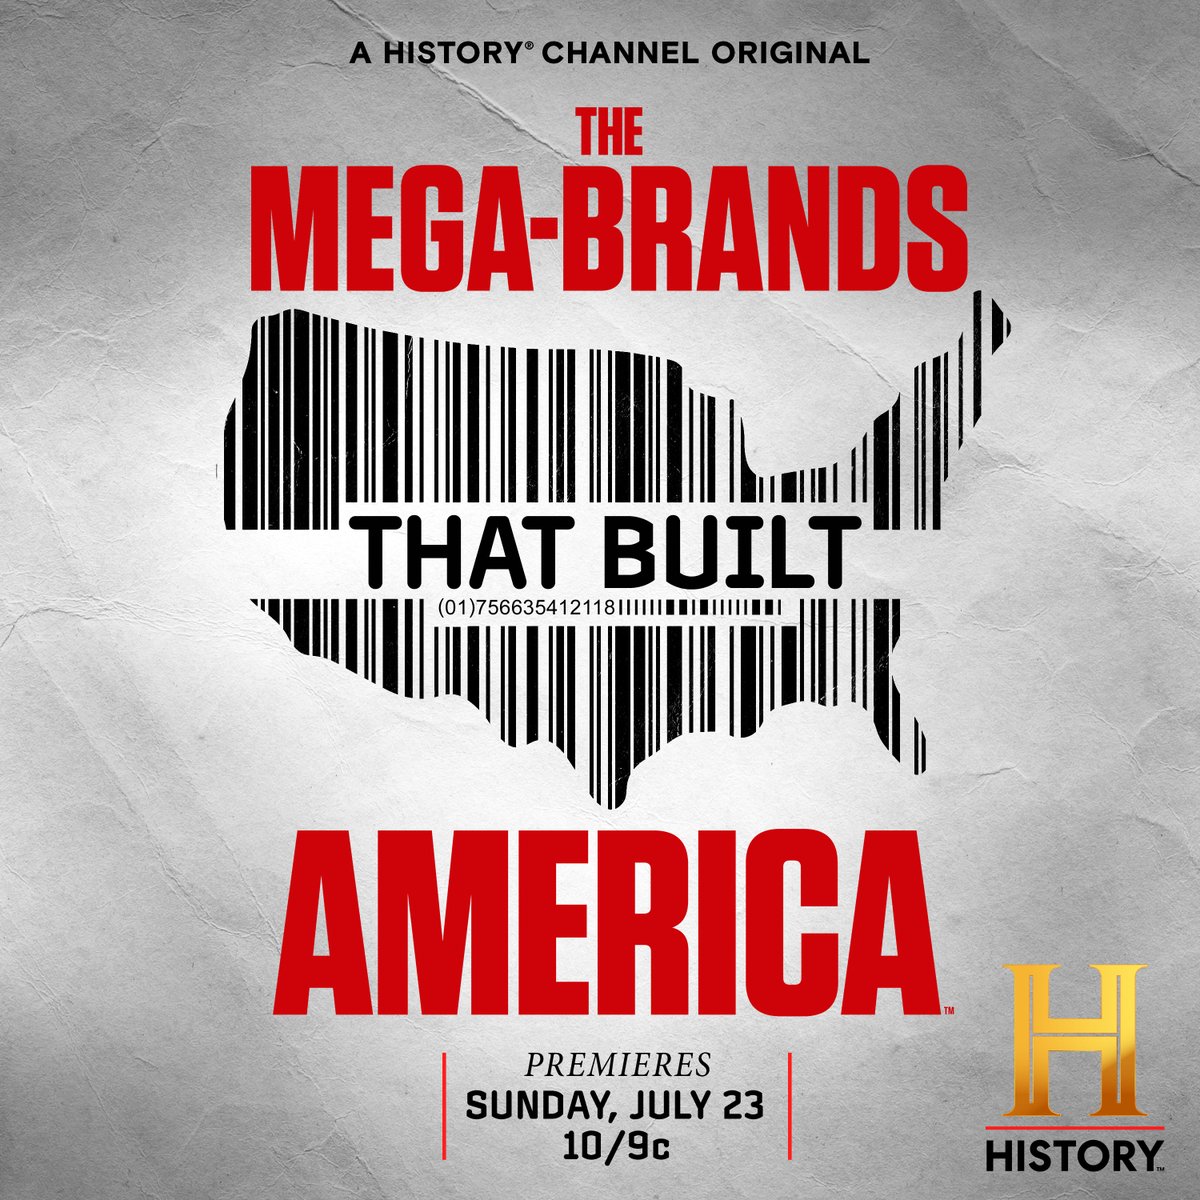 Get ready for a historic shopping spree. The history behind the most notable brands, superstores, and companies is unfolding during #MegaBrandsThatBuiltAmerica, a new HISTORY Channel series beginning Sunday, July 23 at 10/9c, right after a new episode of #FoodThatBuiltAmerica.